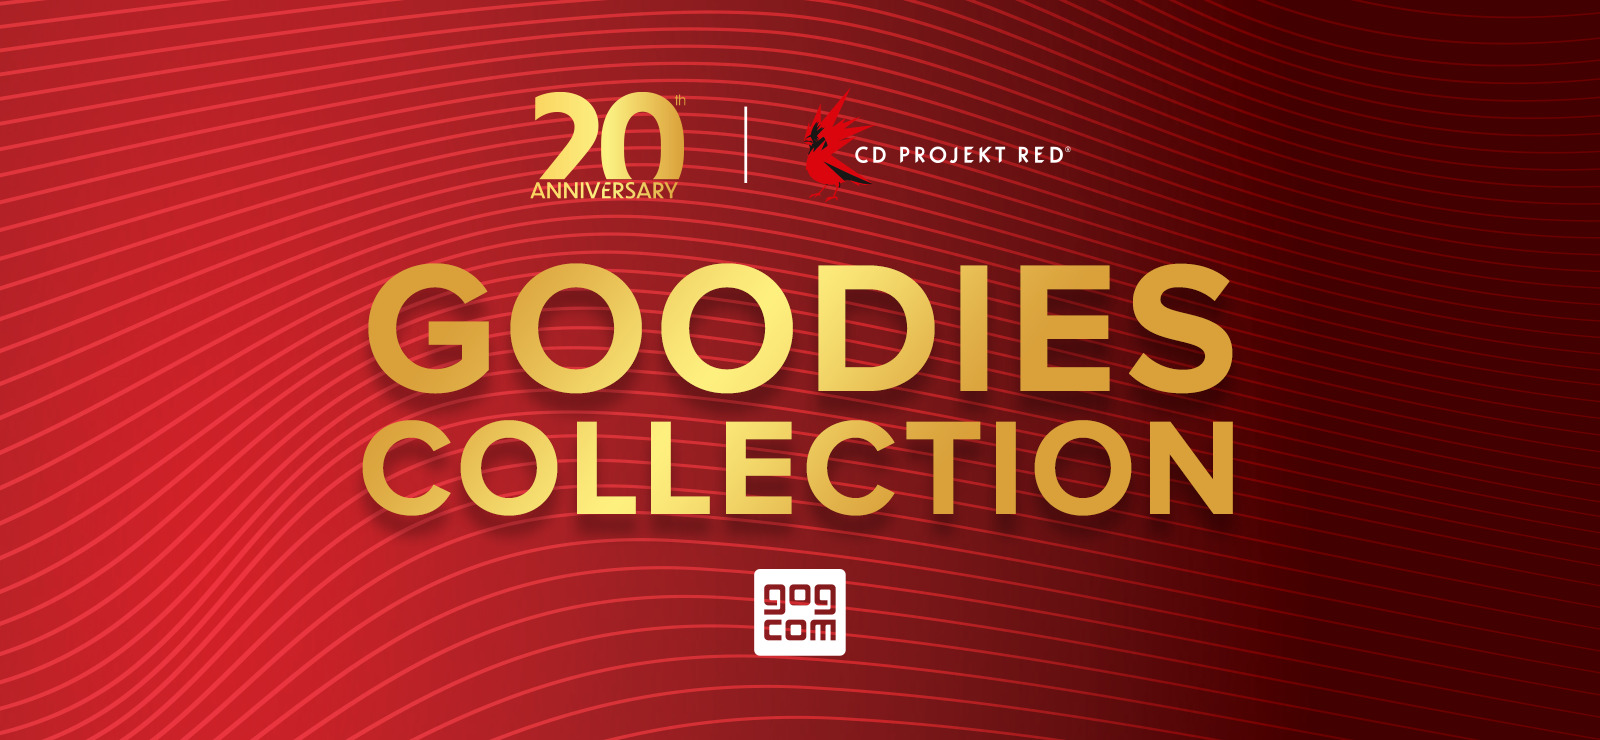 To celebrate 20 years of CD PROJEKT RED, we are offering everybody a chance to redeem the